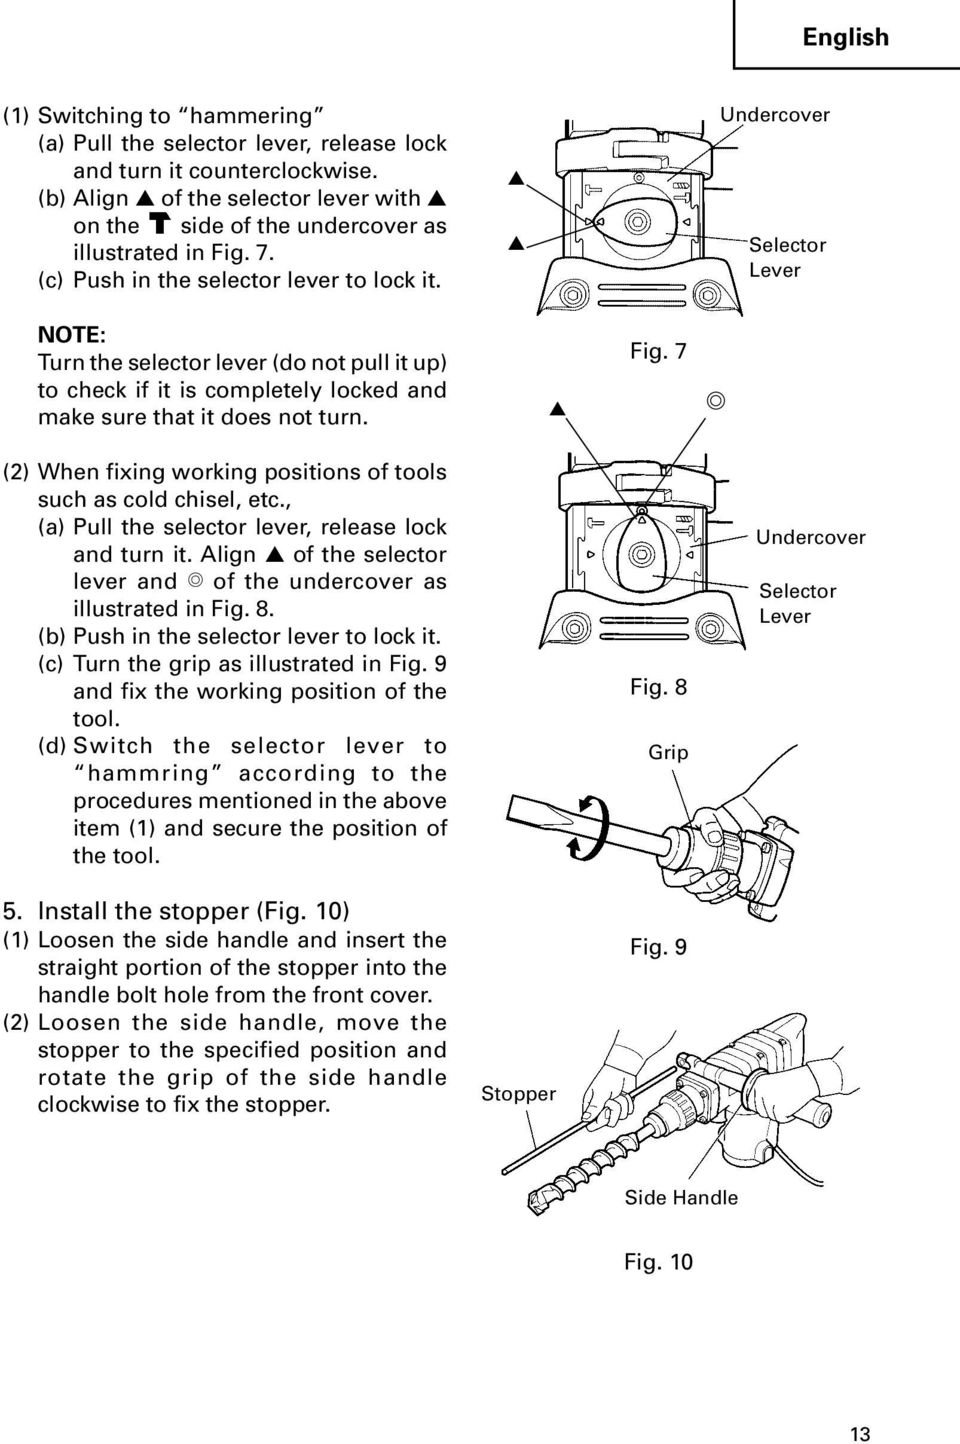 7 (2) When fixing working positions of tools such as cold chisel, etc., (a) Pull the selector lever, release lock and turn it. Align of the selector lever and of the undercover as illustrated in Fig.